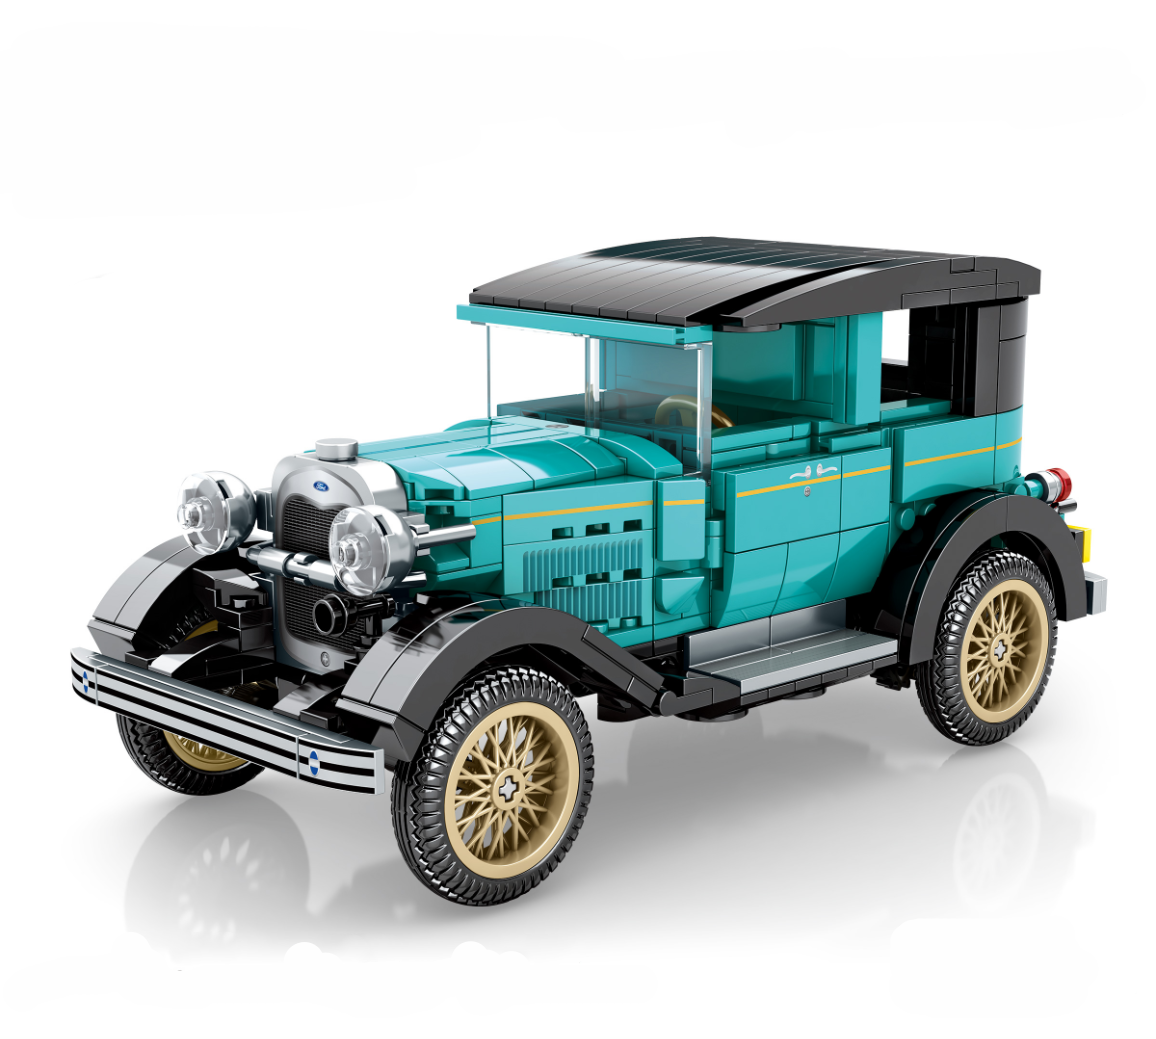 Конструктор SEMBO BLOCK Ford 1930 Model A, 659 деталей, 705807 maisto 1 64 2018 ford gt heritage edition flat transport vehicle set series die cast vehicles collectible hobbies model toys